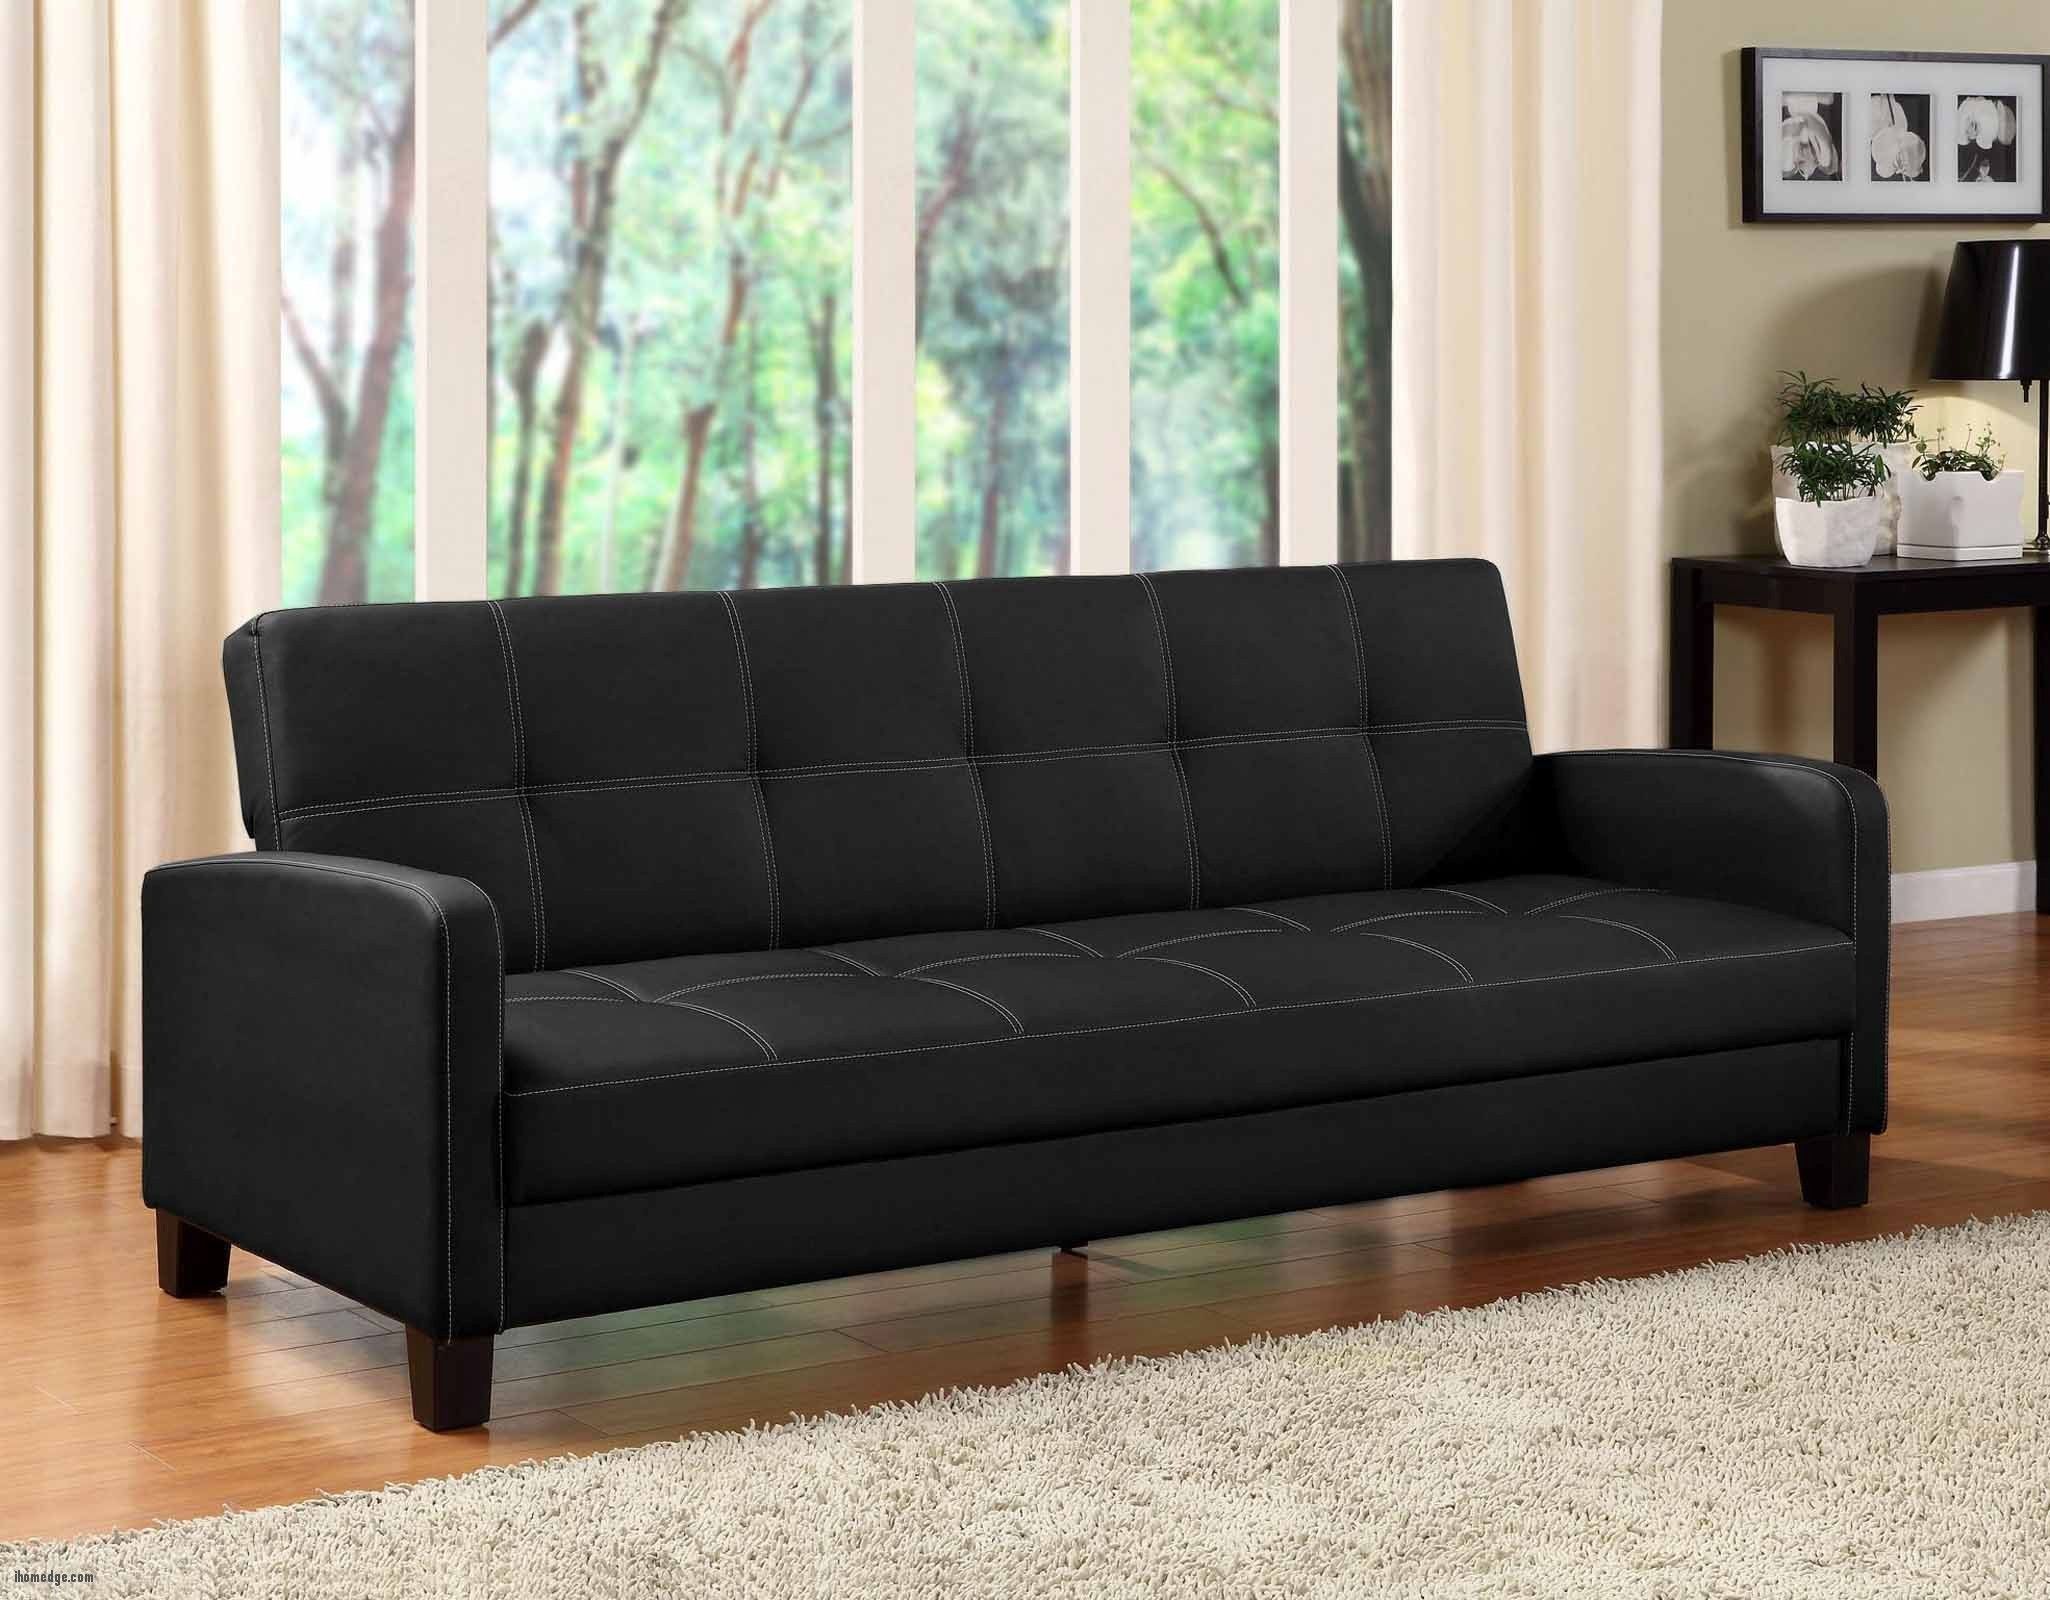 Queen Size Convertible Sofa Bed – Ideas On Foter With Regard To Queen Size Convertible Sofa Beds (Gallery 8 of 20)